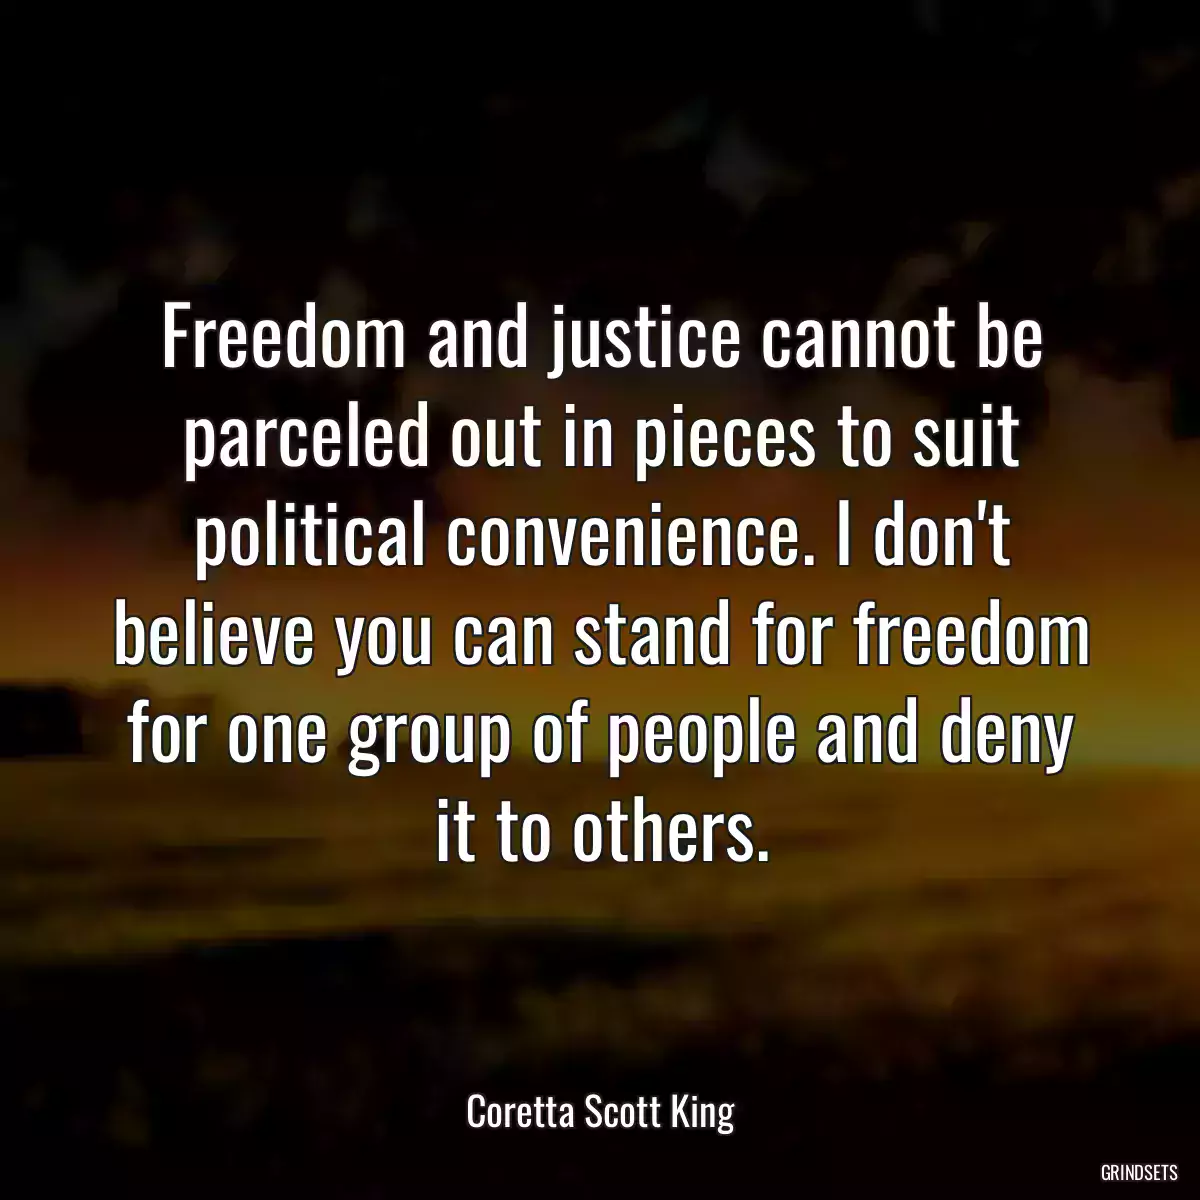 Freedom and justice cannot be parceled out in pieces to suit political convenience. I don\'t believe you can stand for freedom for one group of people and deny it to others.